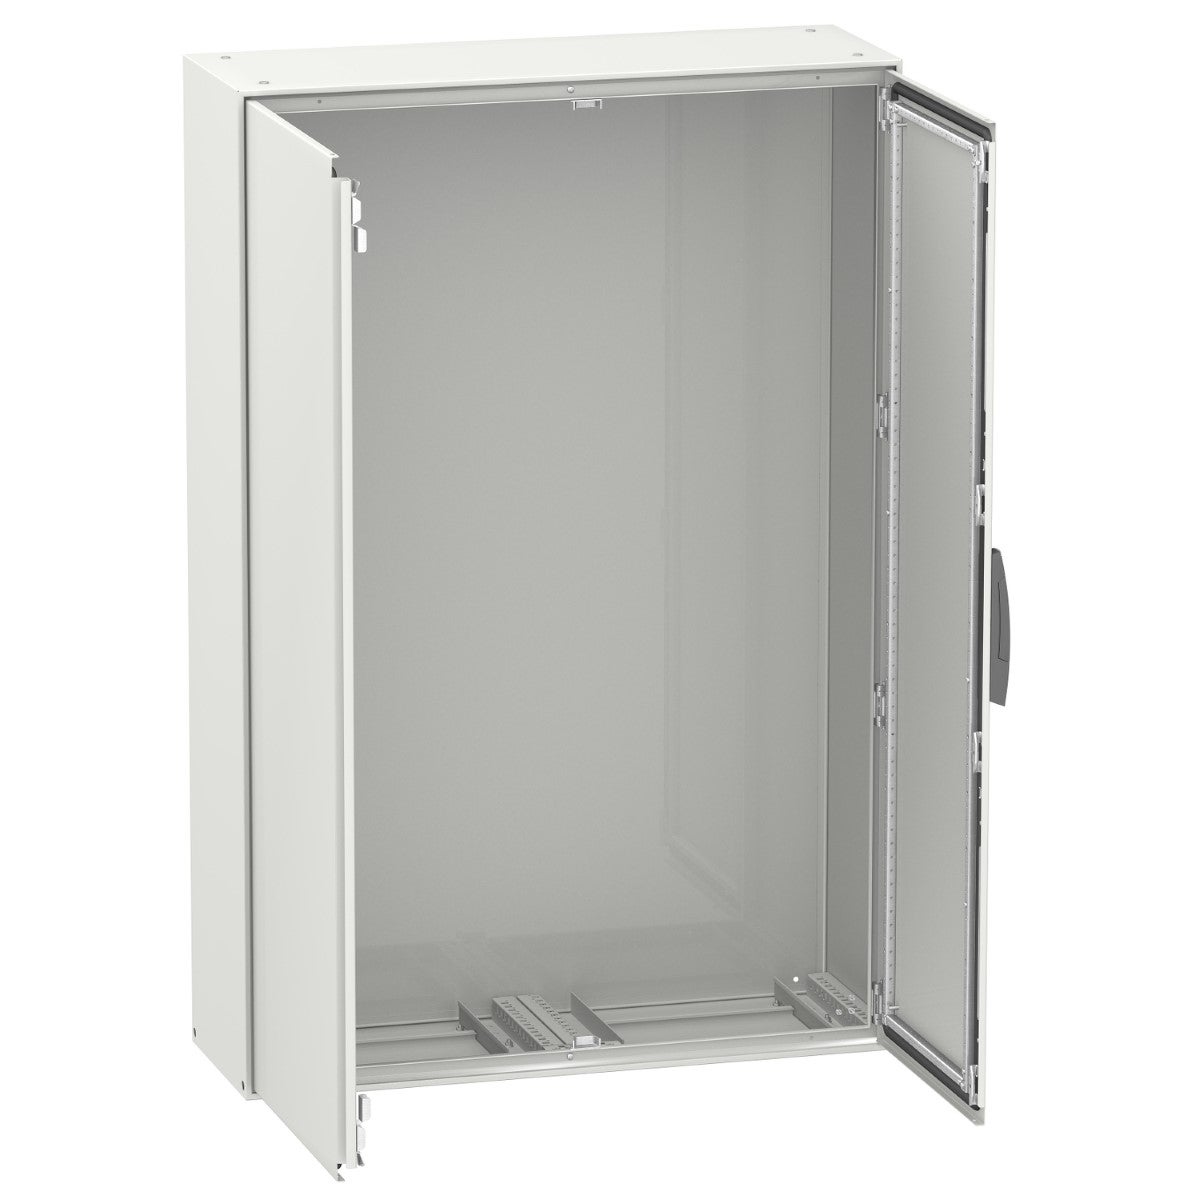 Spacial SM compact enclosure without mounting plate - 2000x1600x600 mm